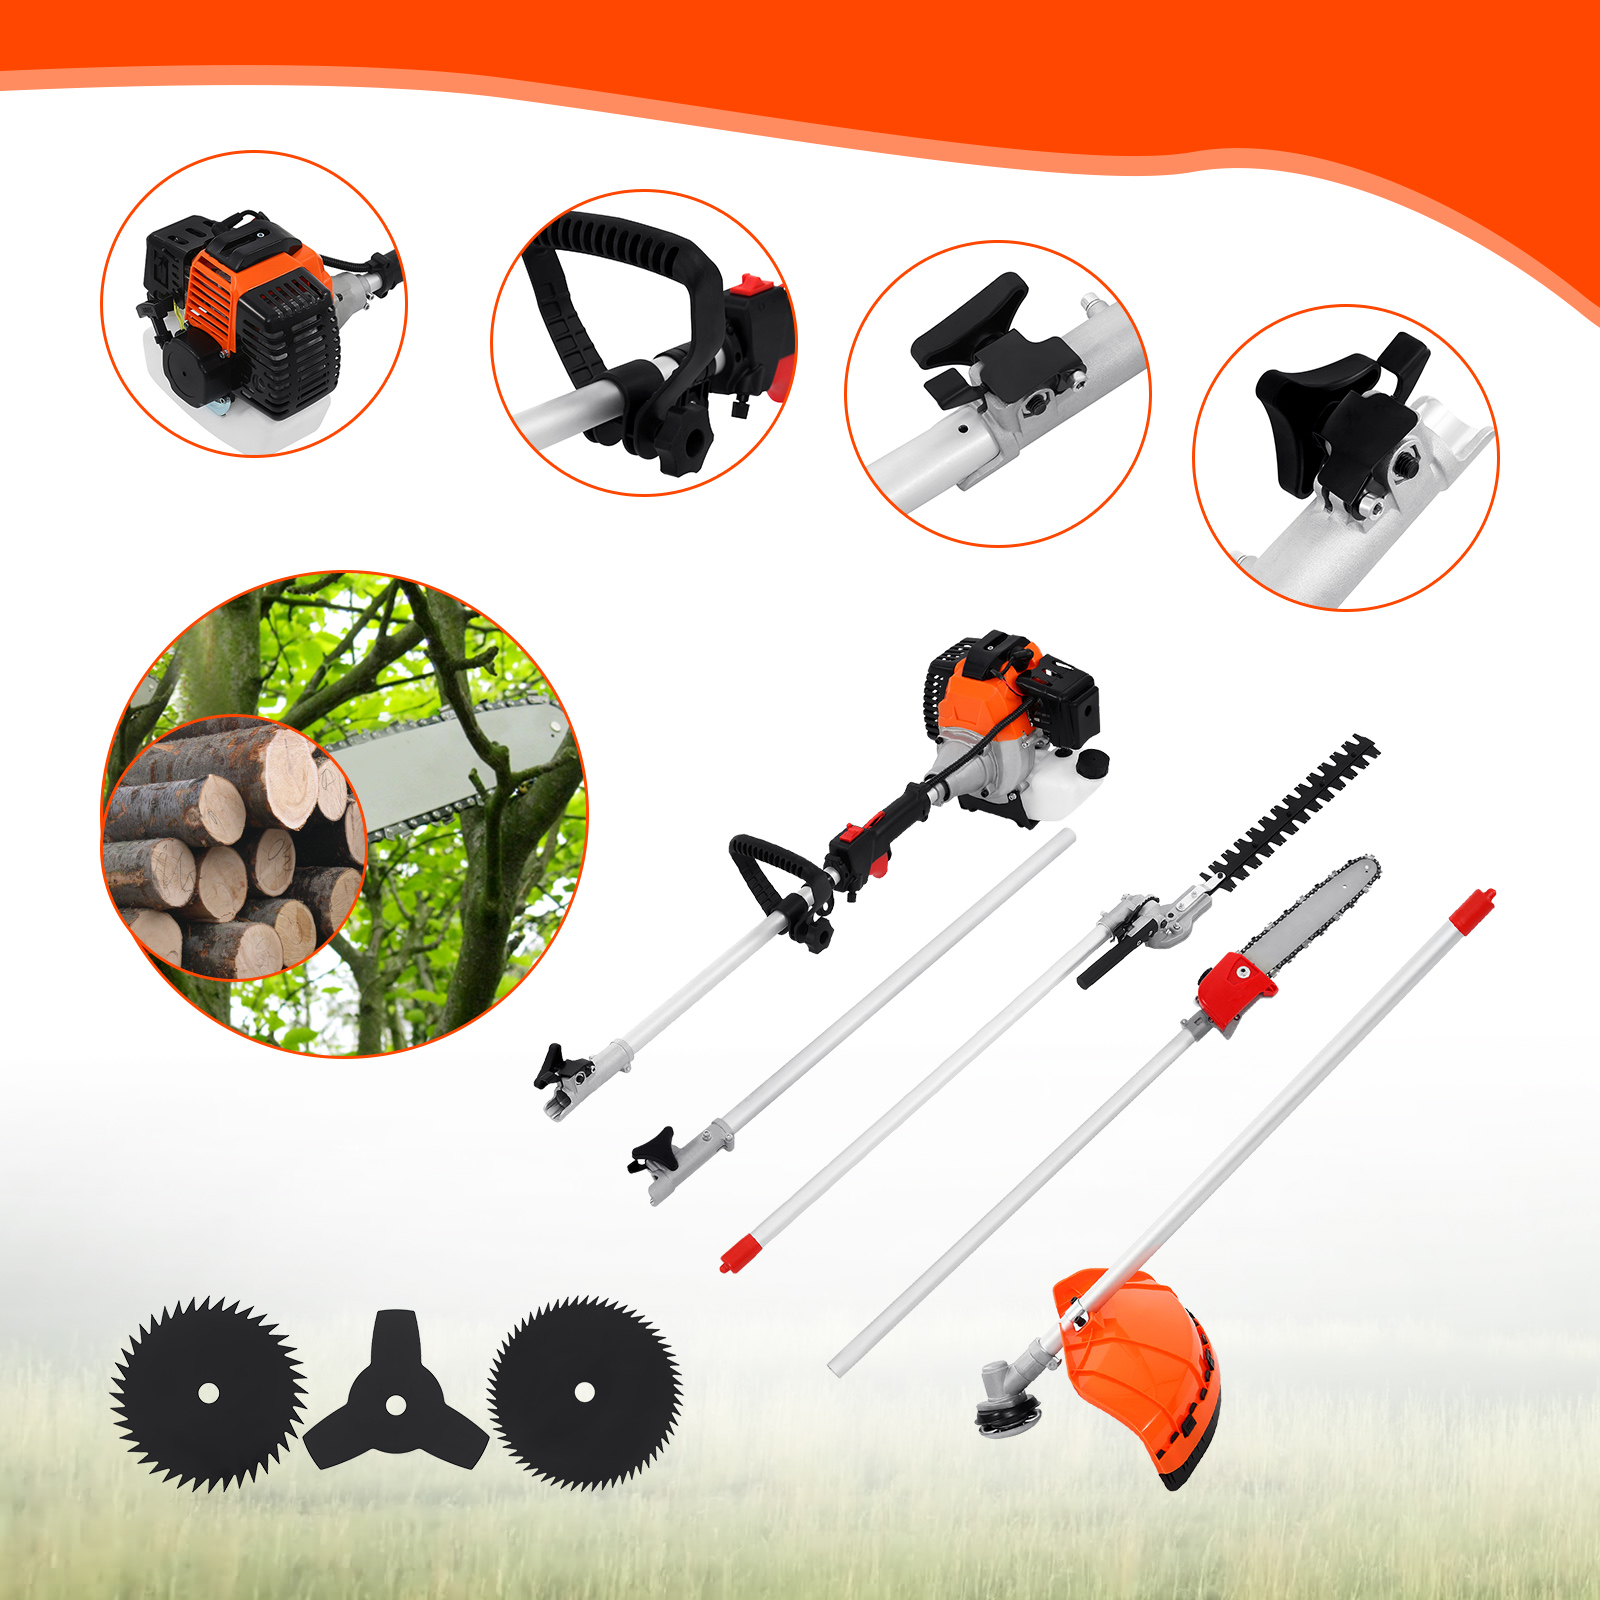 4 in 1 Gas String Trimmer 2 Cycle, 52CC Weed Eater Lawn Edger, Weed Wacker with Brush Cutter and Hedge Trimmer, Multifunction Edger Tools for Garden, Yard, Sidewalks, TE3205 - image 4 of 9